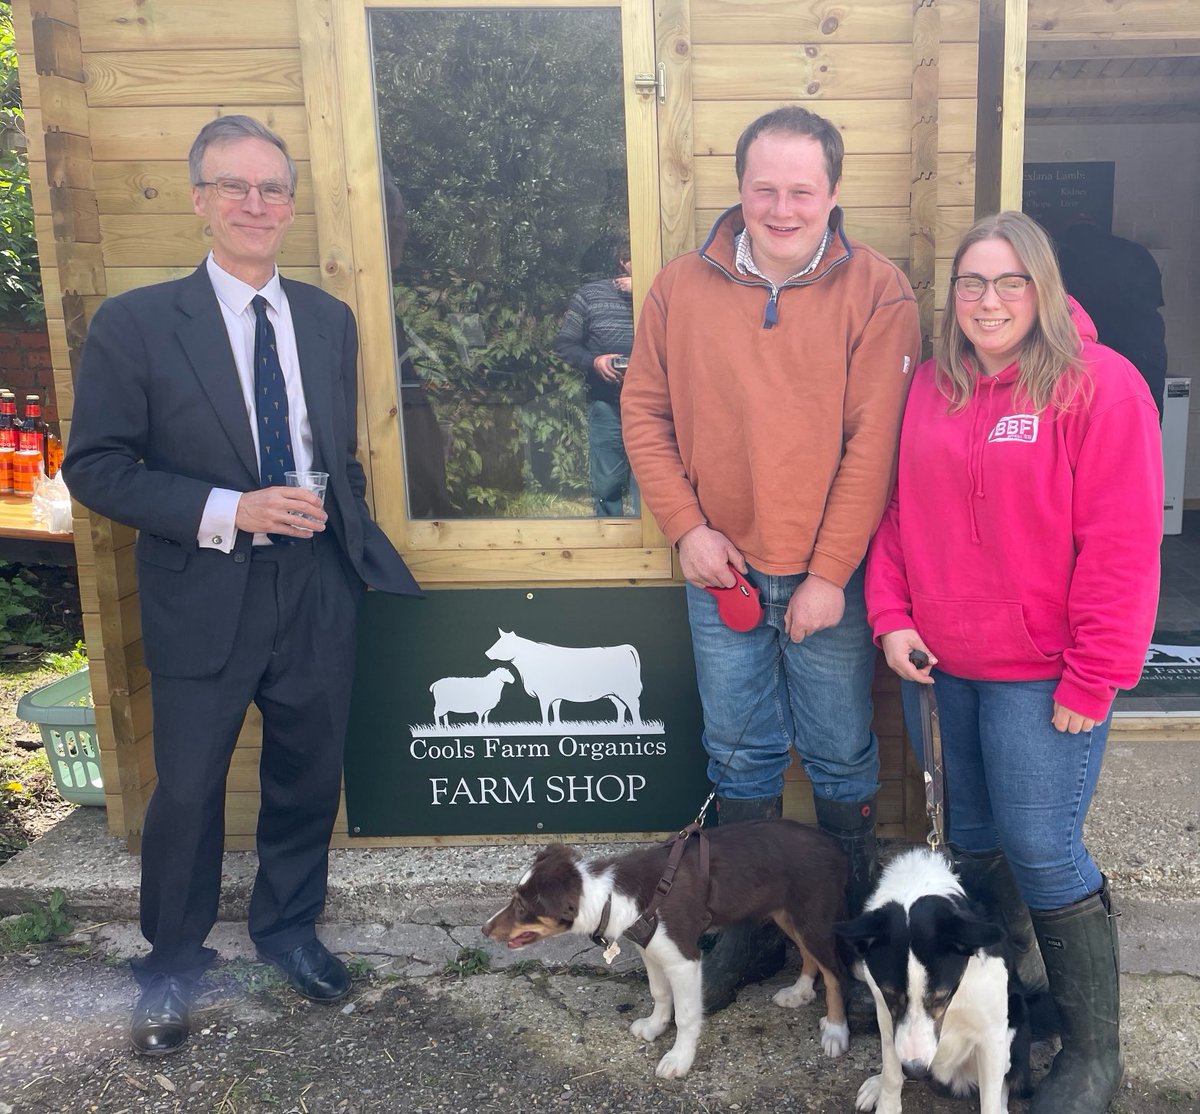 Really good to cut ribbon at Cools Farm Shop East Knoyle. Wiltshire’s answer to @JeremyClarkson⁩! Good luck Tom and Emily in their farm business diversification venture.